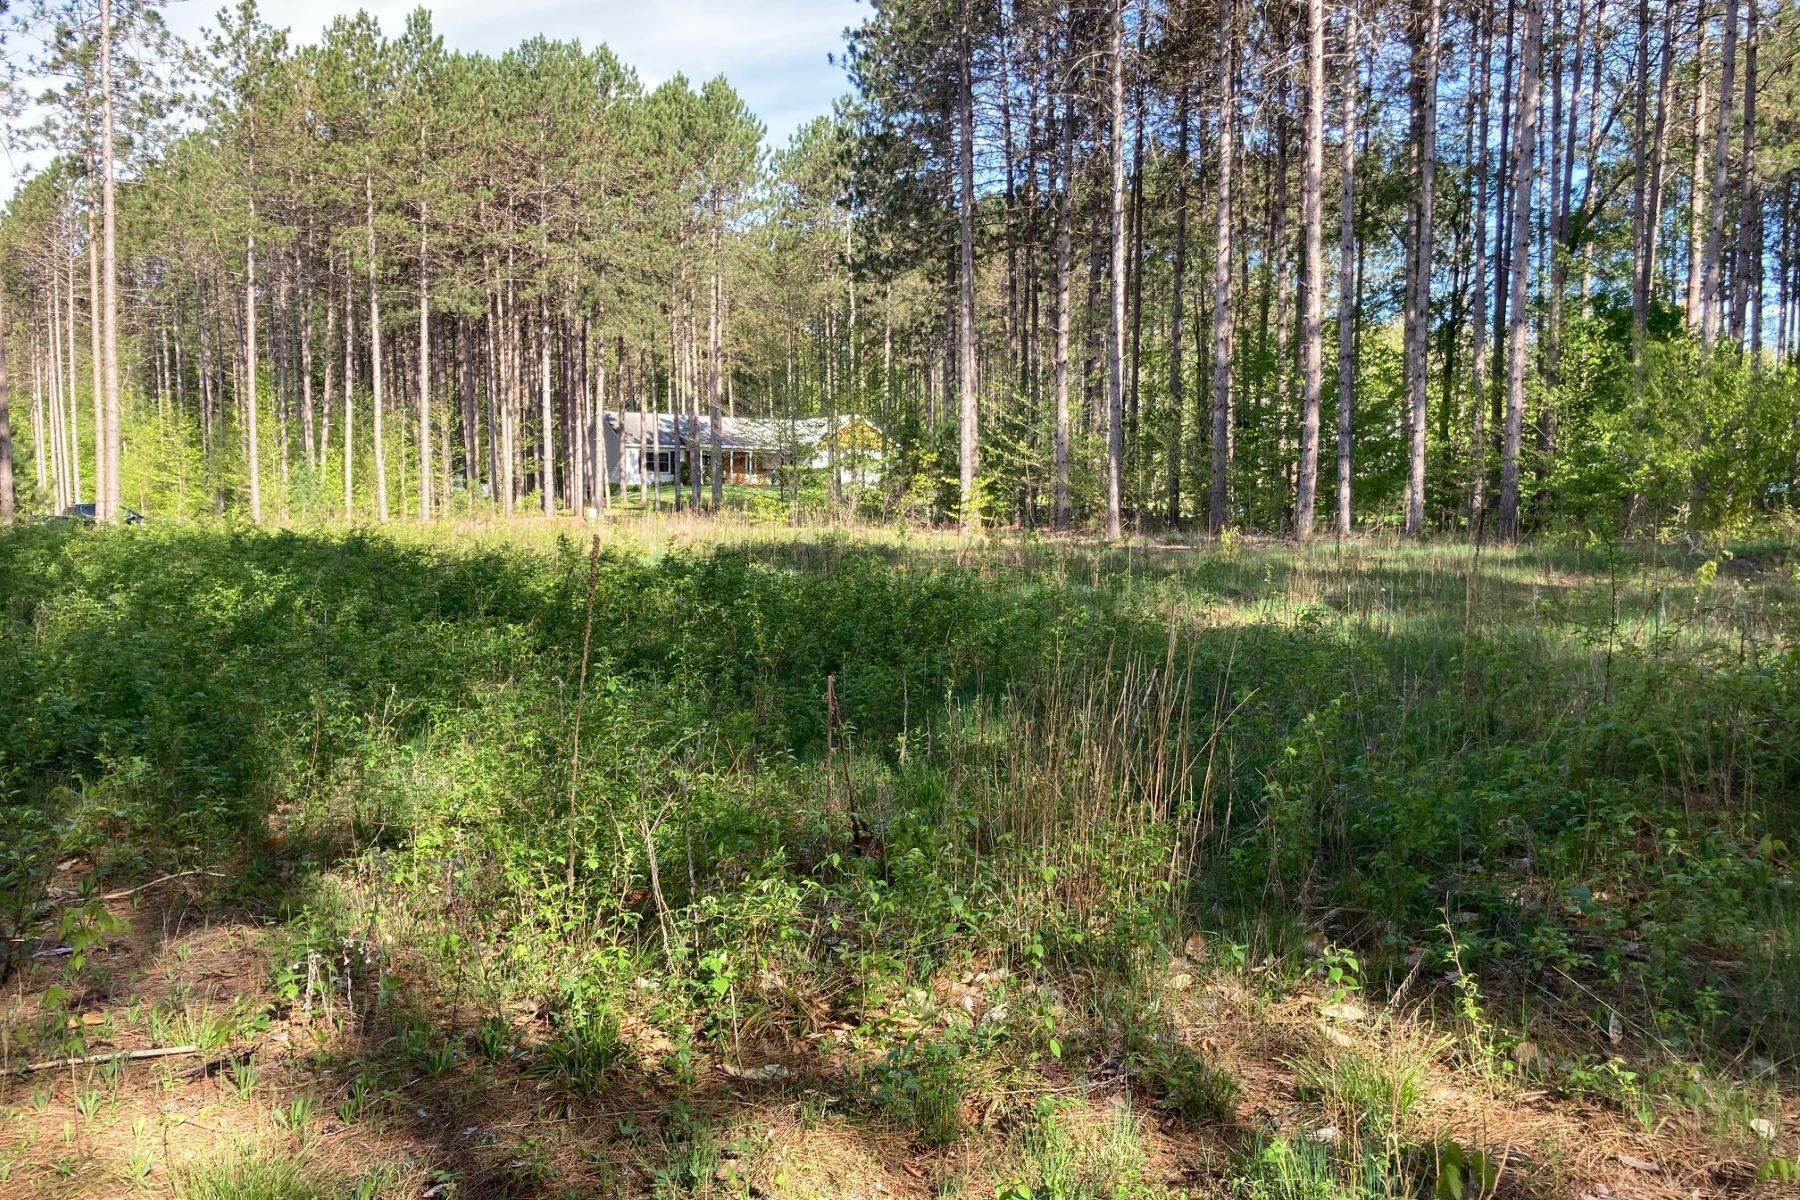 4. Land for Sale at Vacant Lot in Desirable Neighborhood 7789 Red Pine Trail Alanson, Michigan 49706 United States